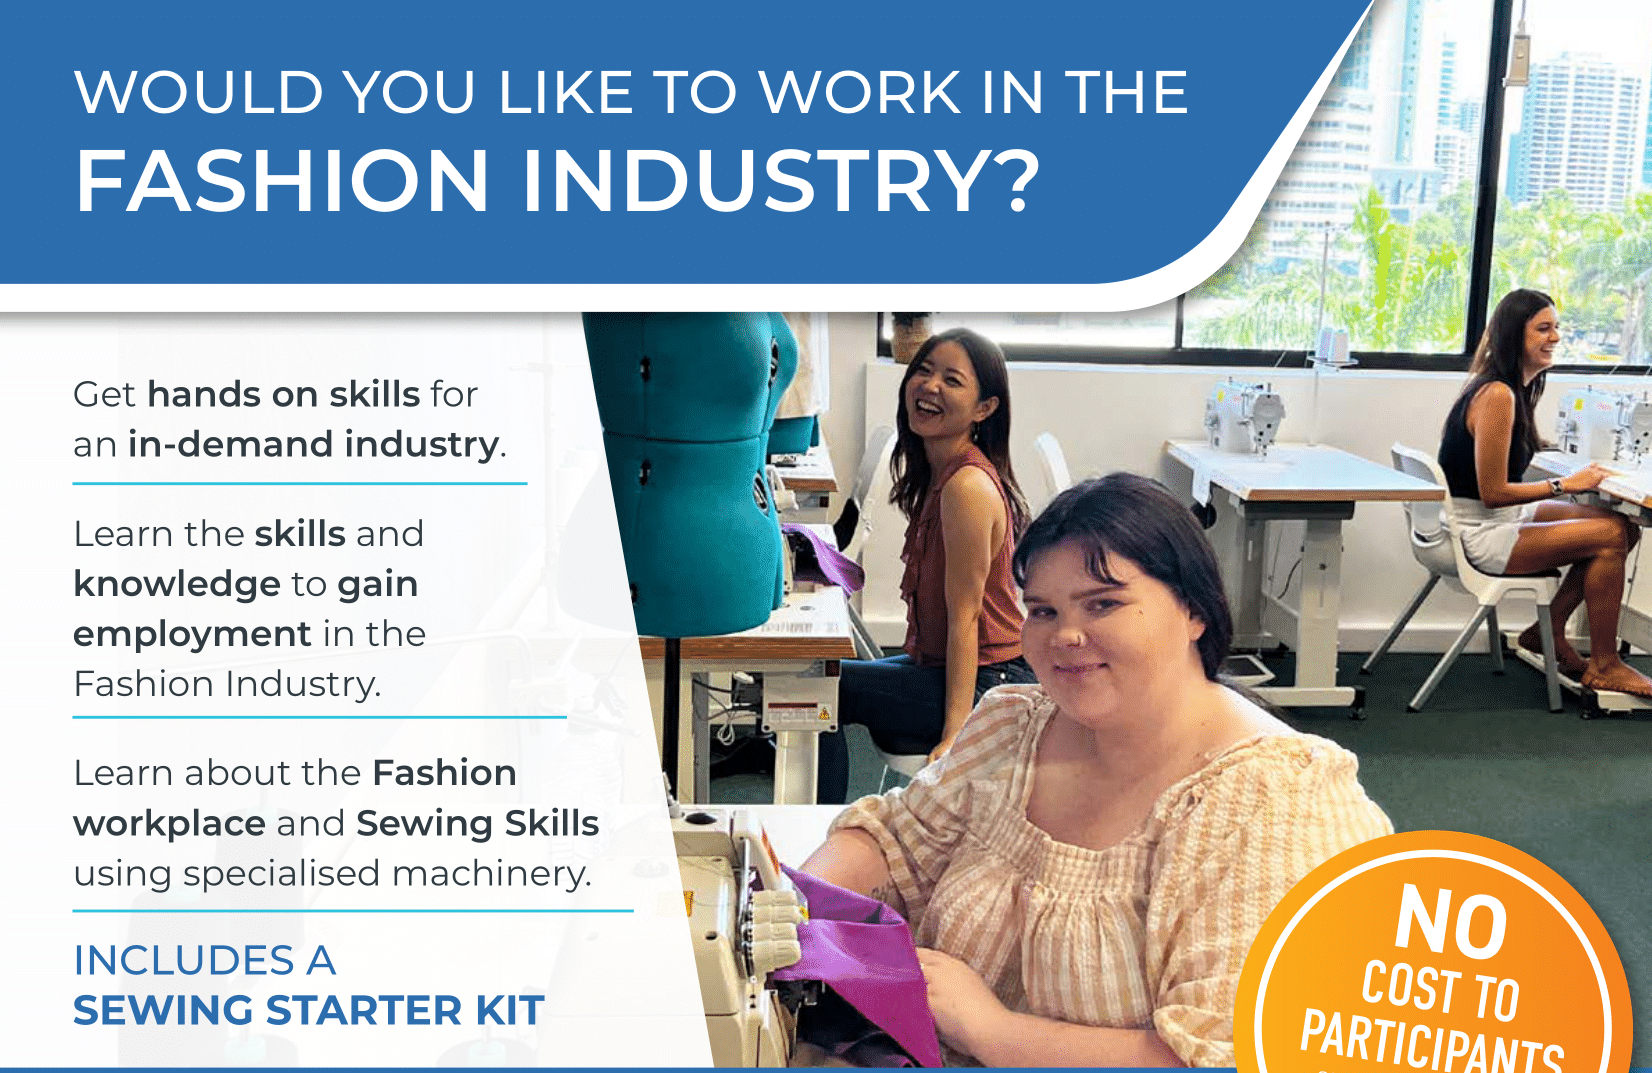 Would you like to work in the Fashion Industry? Image